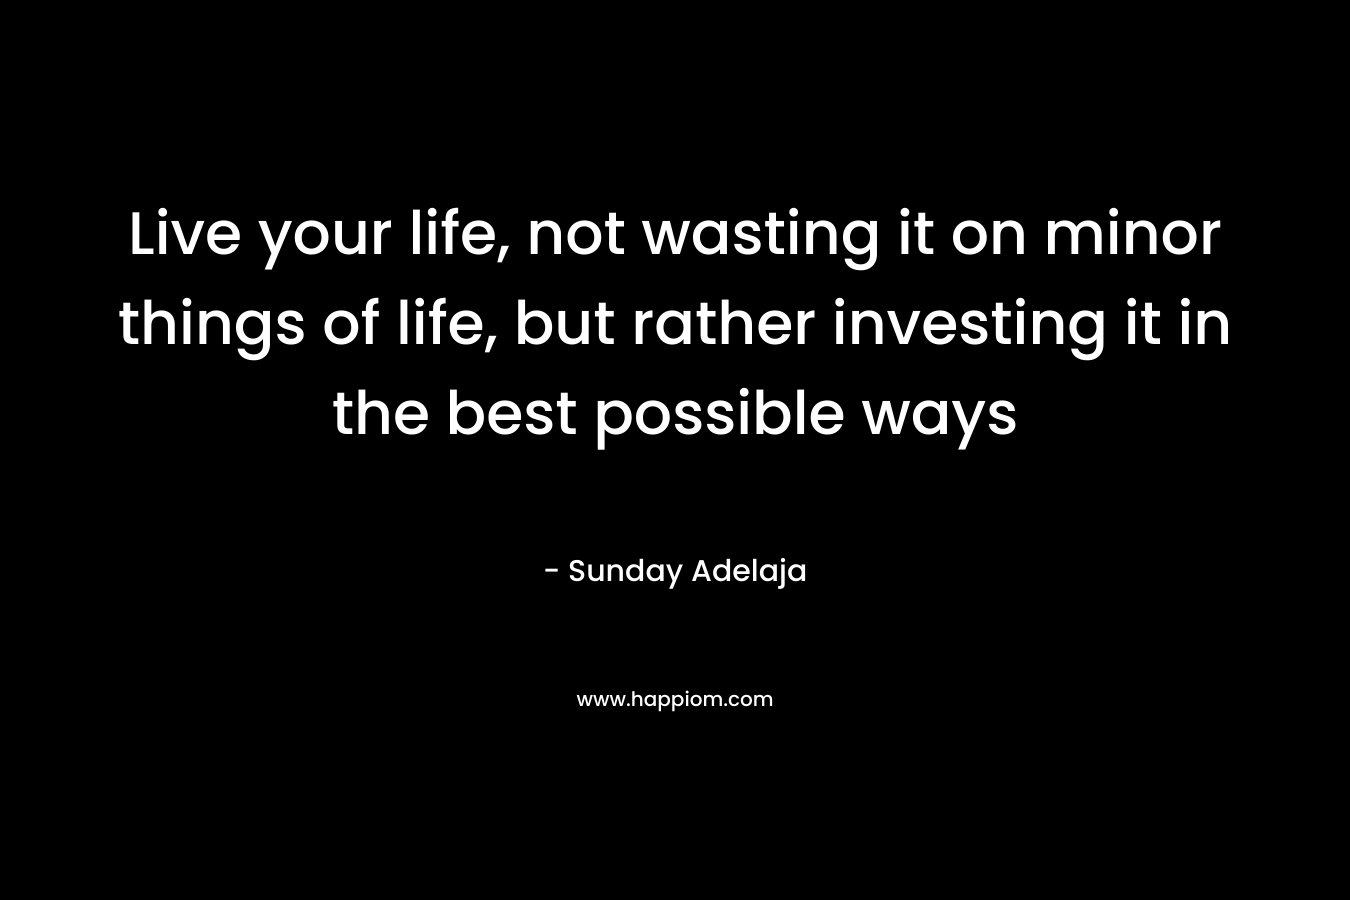 Live your life, not wasting it on minor things of life, but rather investing it in the best possible ways – Sunday Adelaja